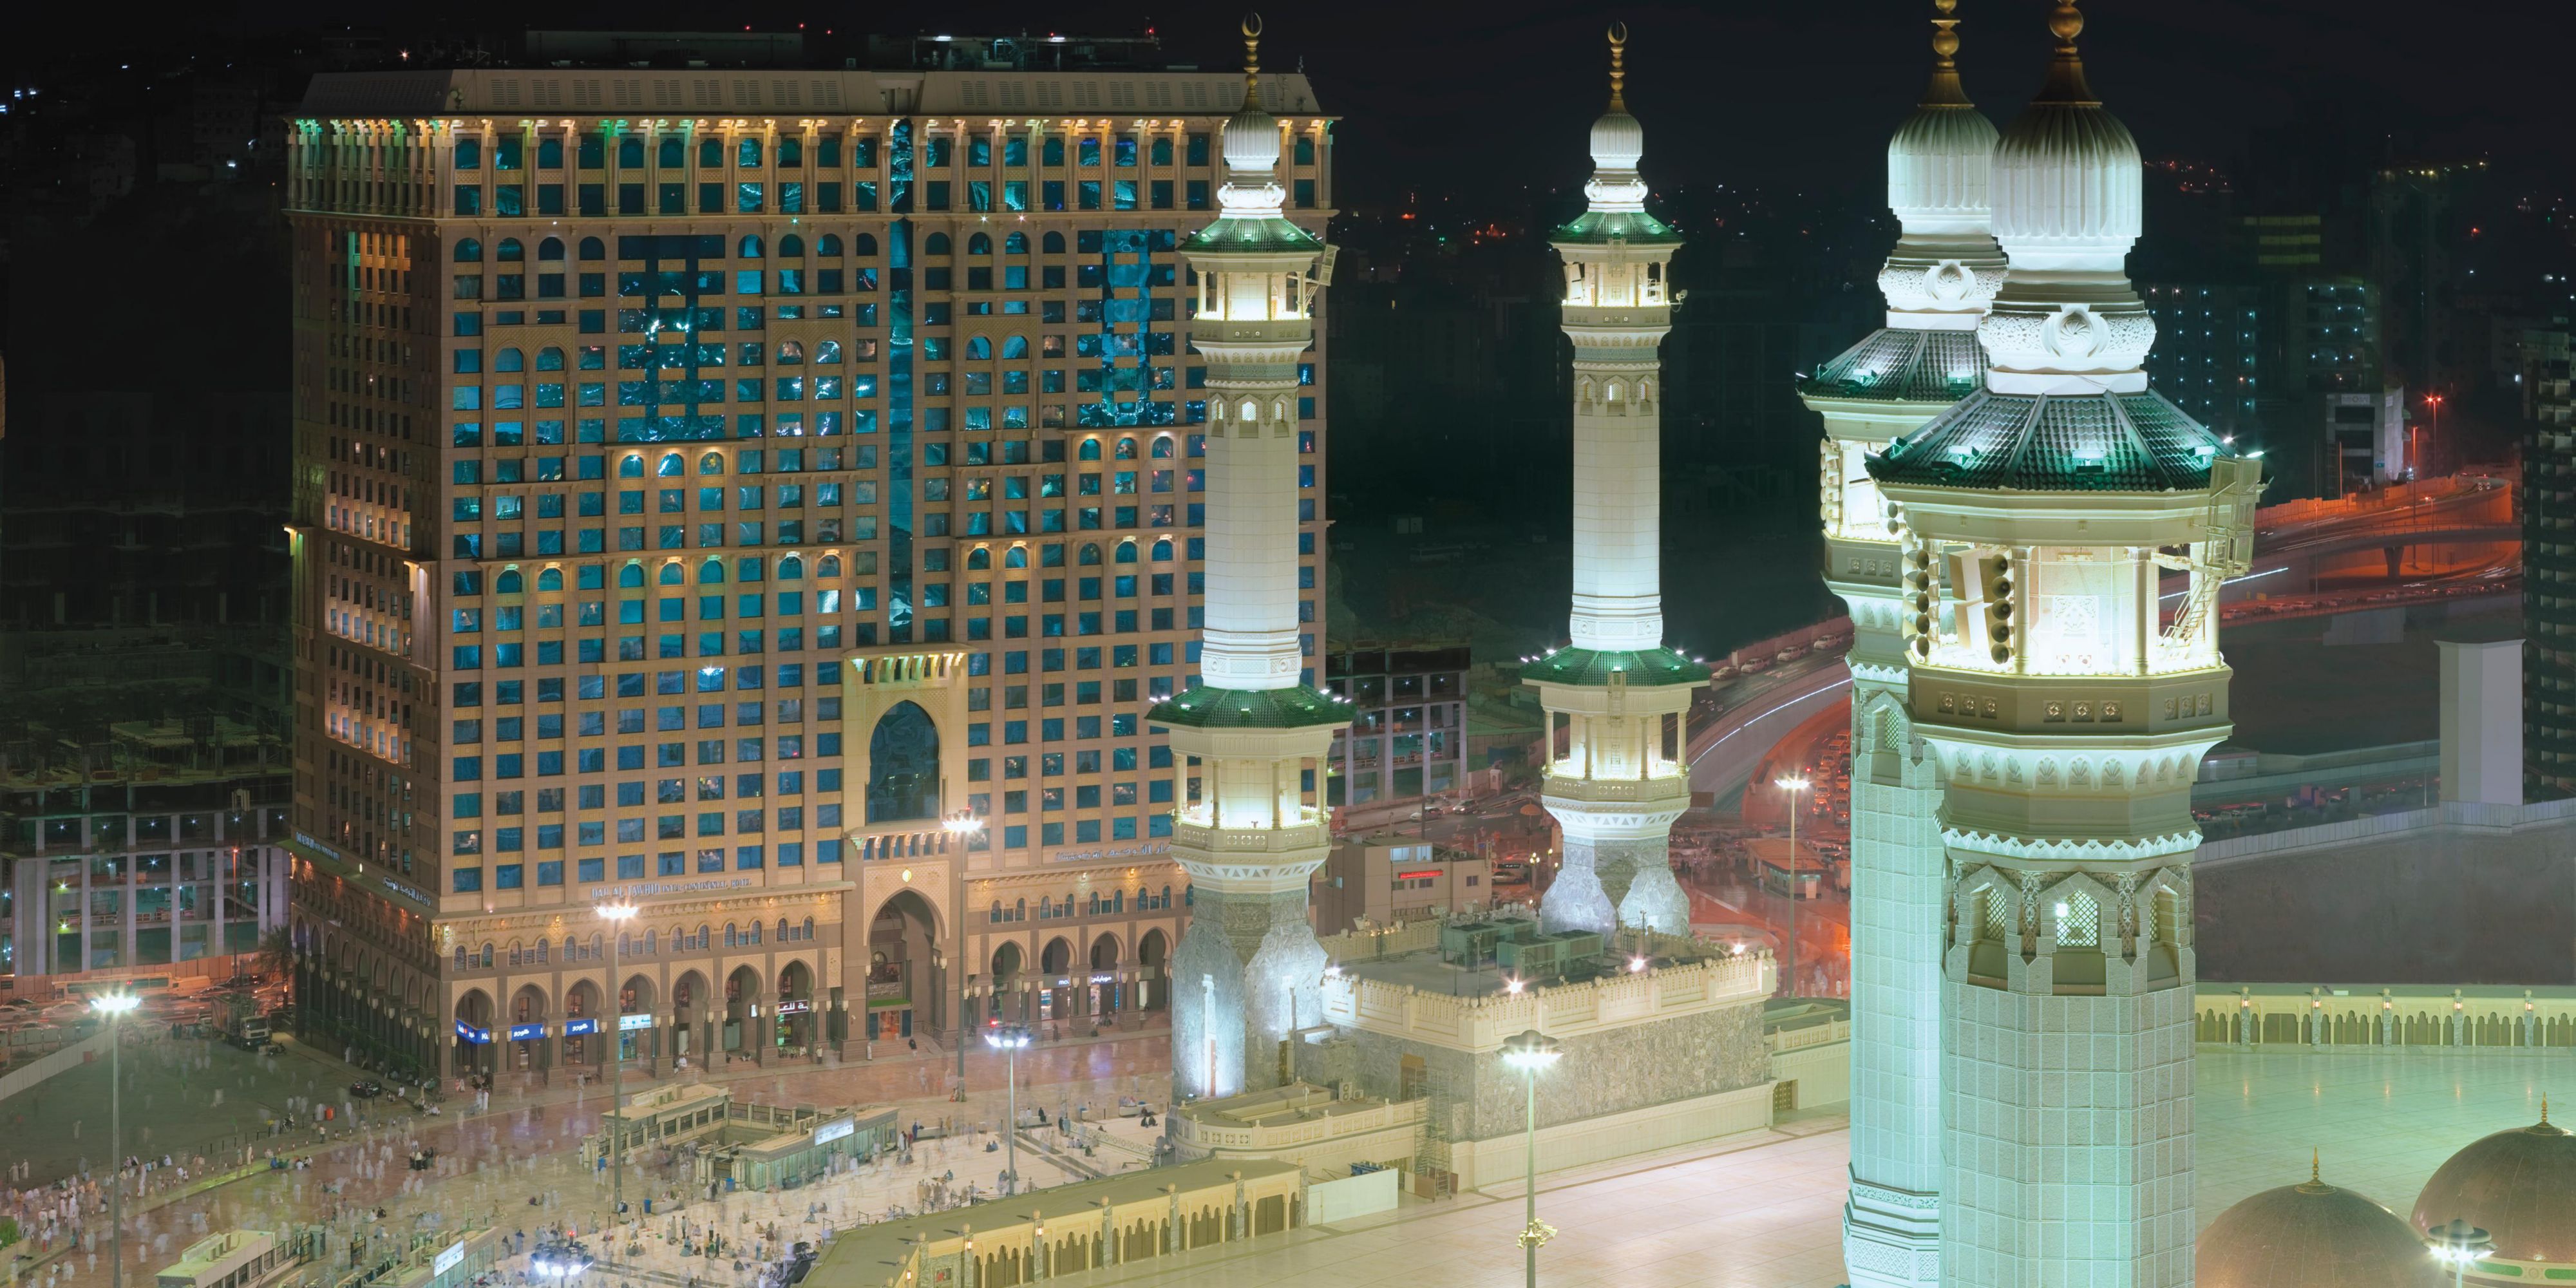 If you are looking for a luxury hotel near Kaaba, InterContinental Dar Al Tawhid Makkah has everything you need. Conveniently located just steps away from King Fahad Gate and the Holy Kaaba, our hotel provides unparalleled access for performing daily prayers, Umrah and Hajj, making it perfect for pilgrims seeking comfort and proximity.